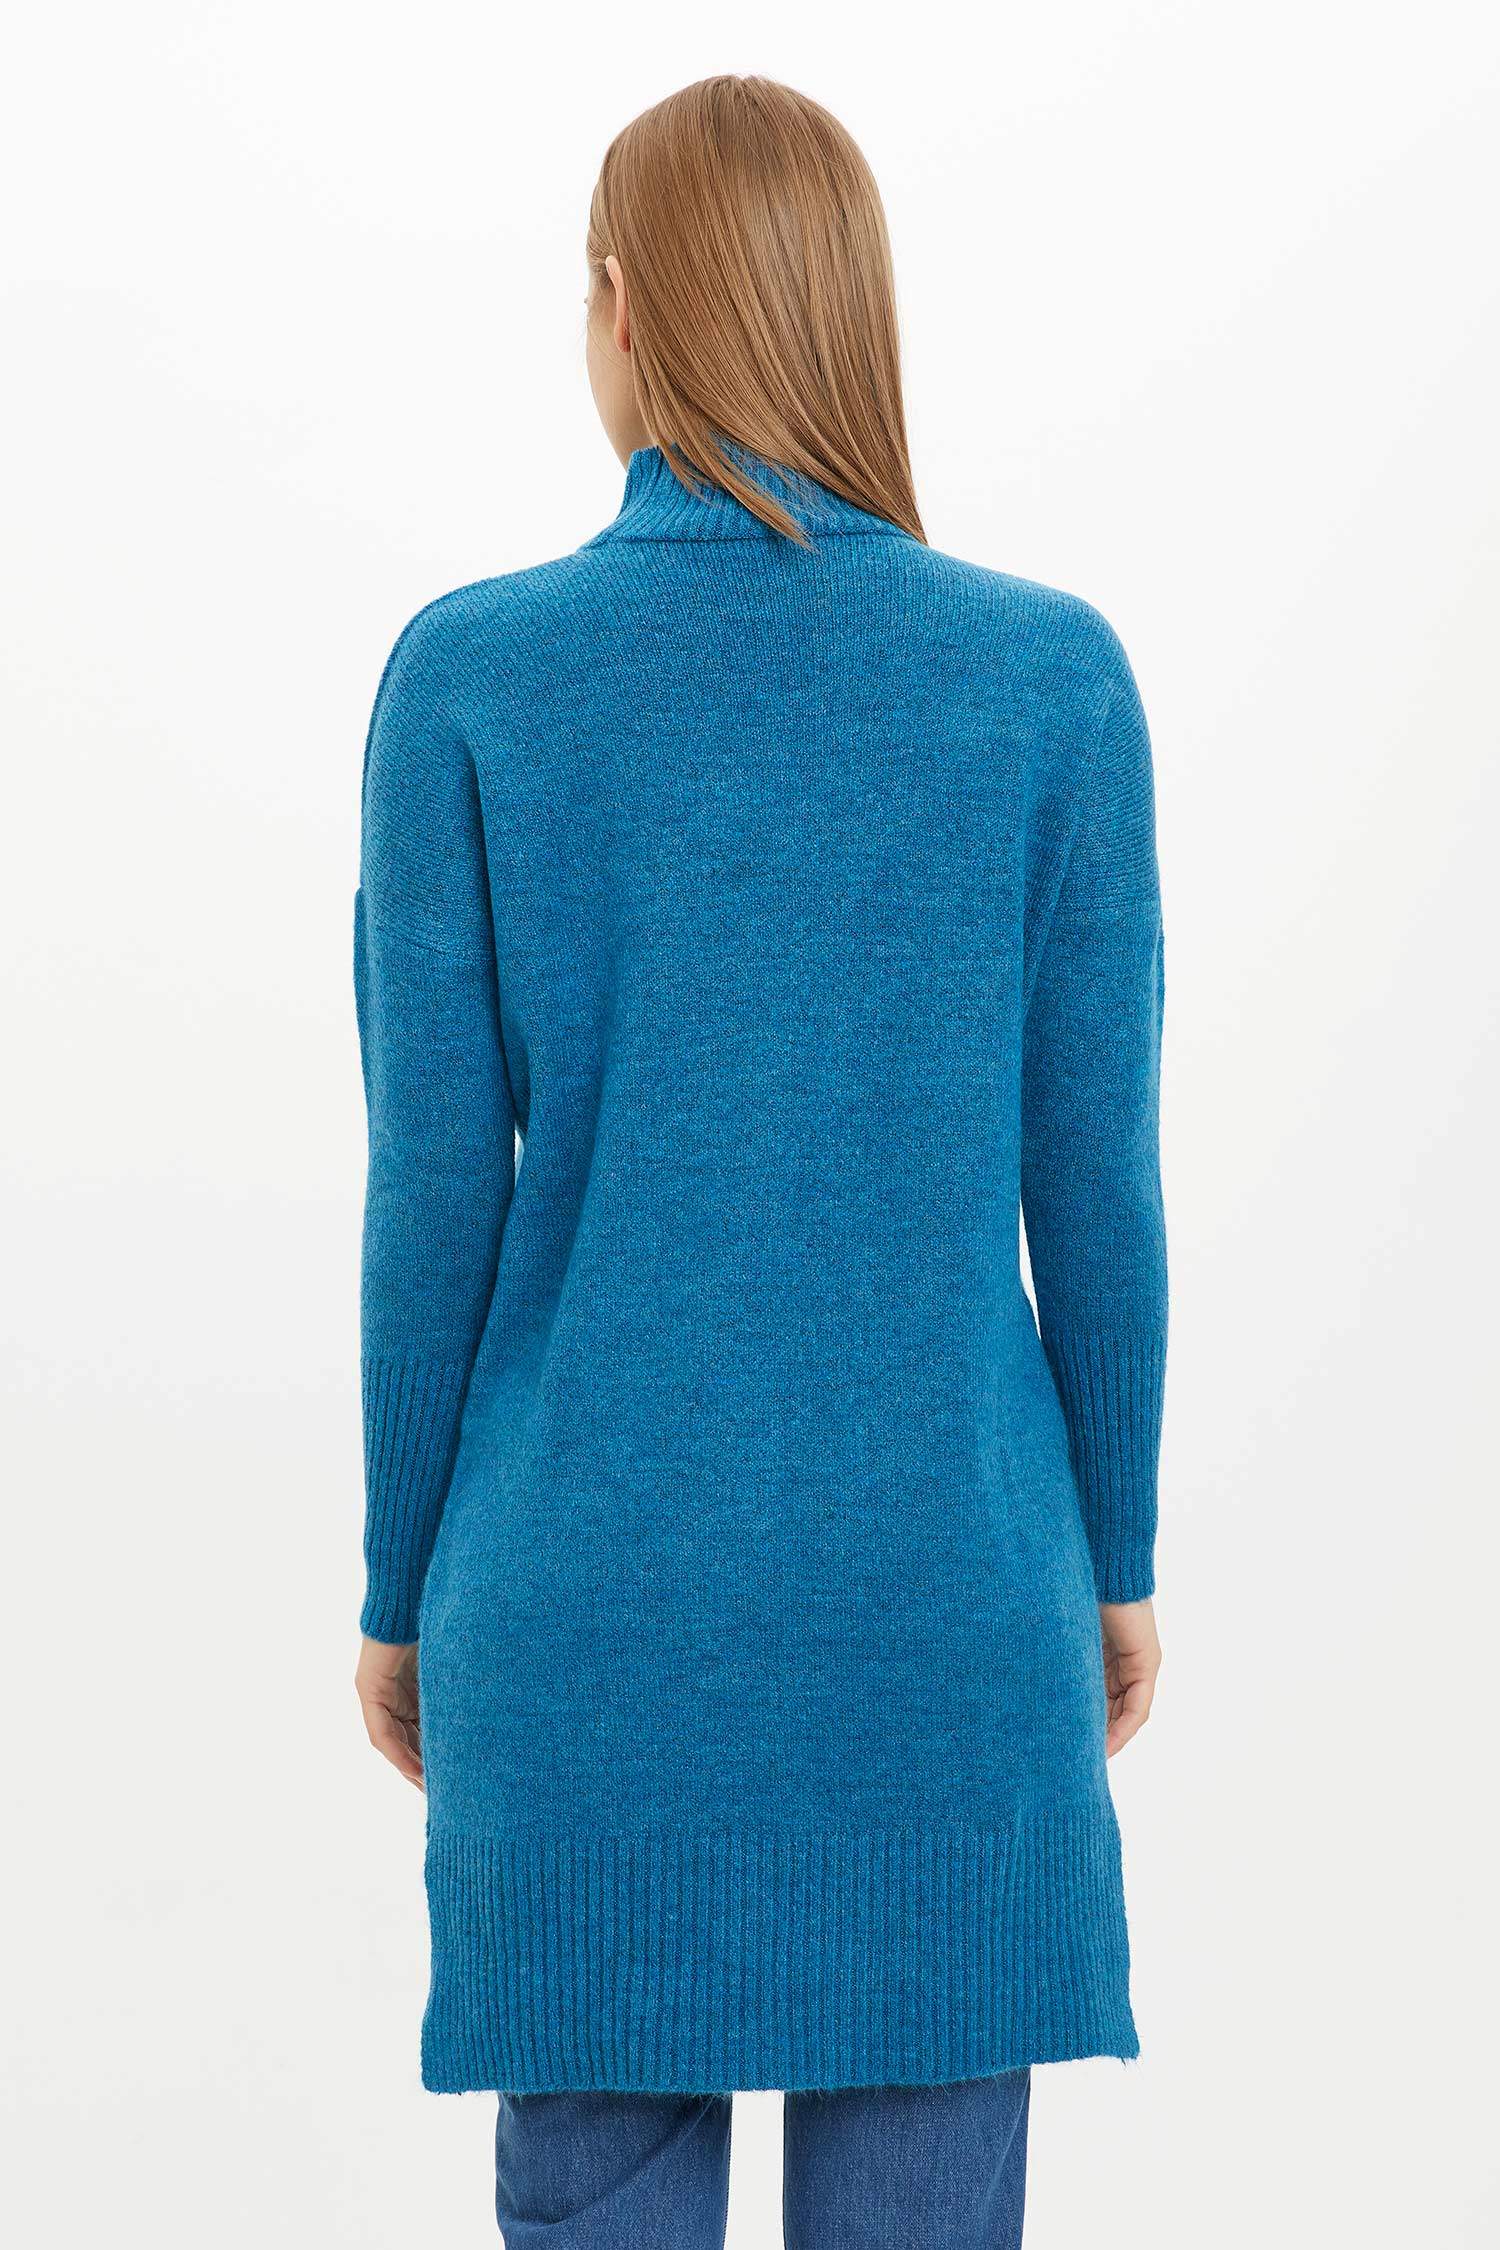 Blue WOMAN Regular Fit Crew Neck Long Sleeve Tricot Tunic 1235620 | DeFacto